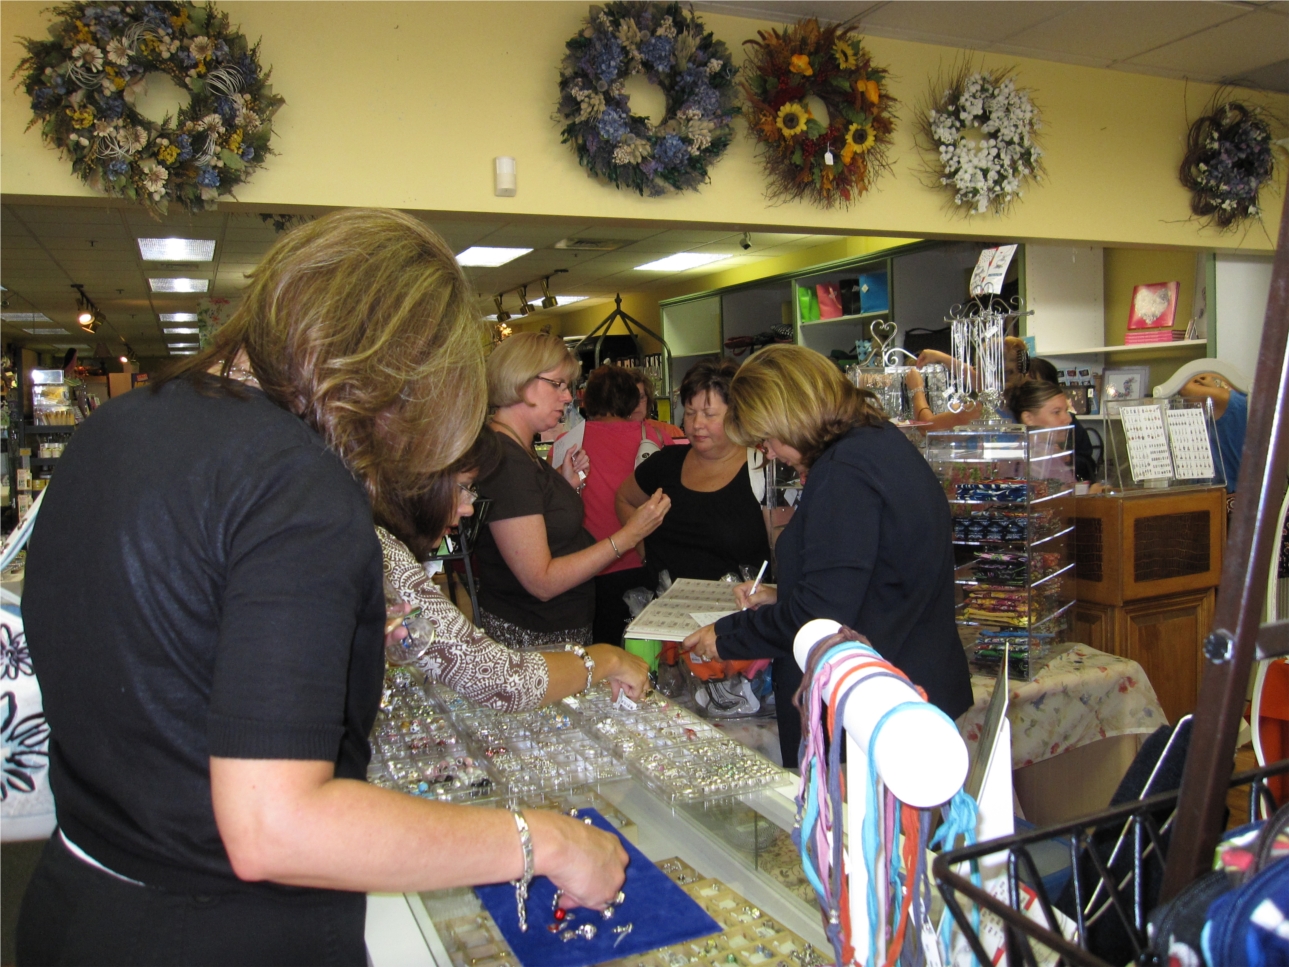 Customers at Heart And Home look over the selection of charms at a "Charms and Chardonnay" party.